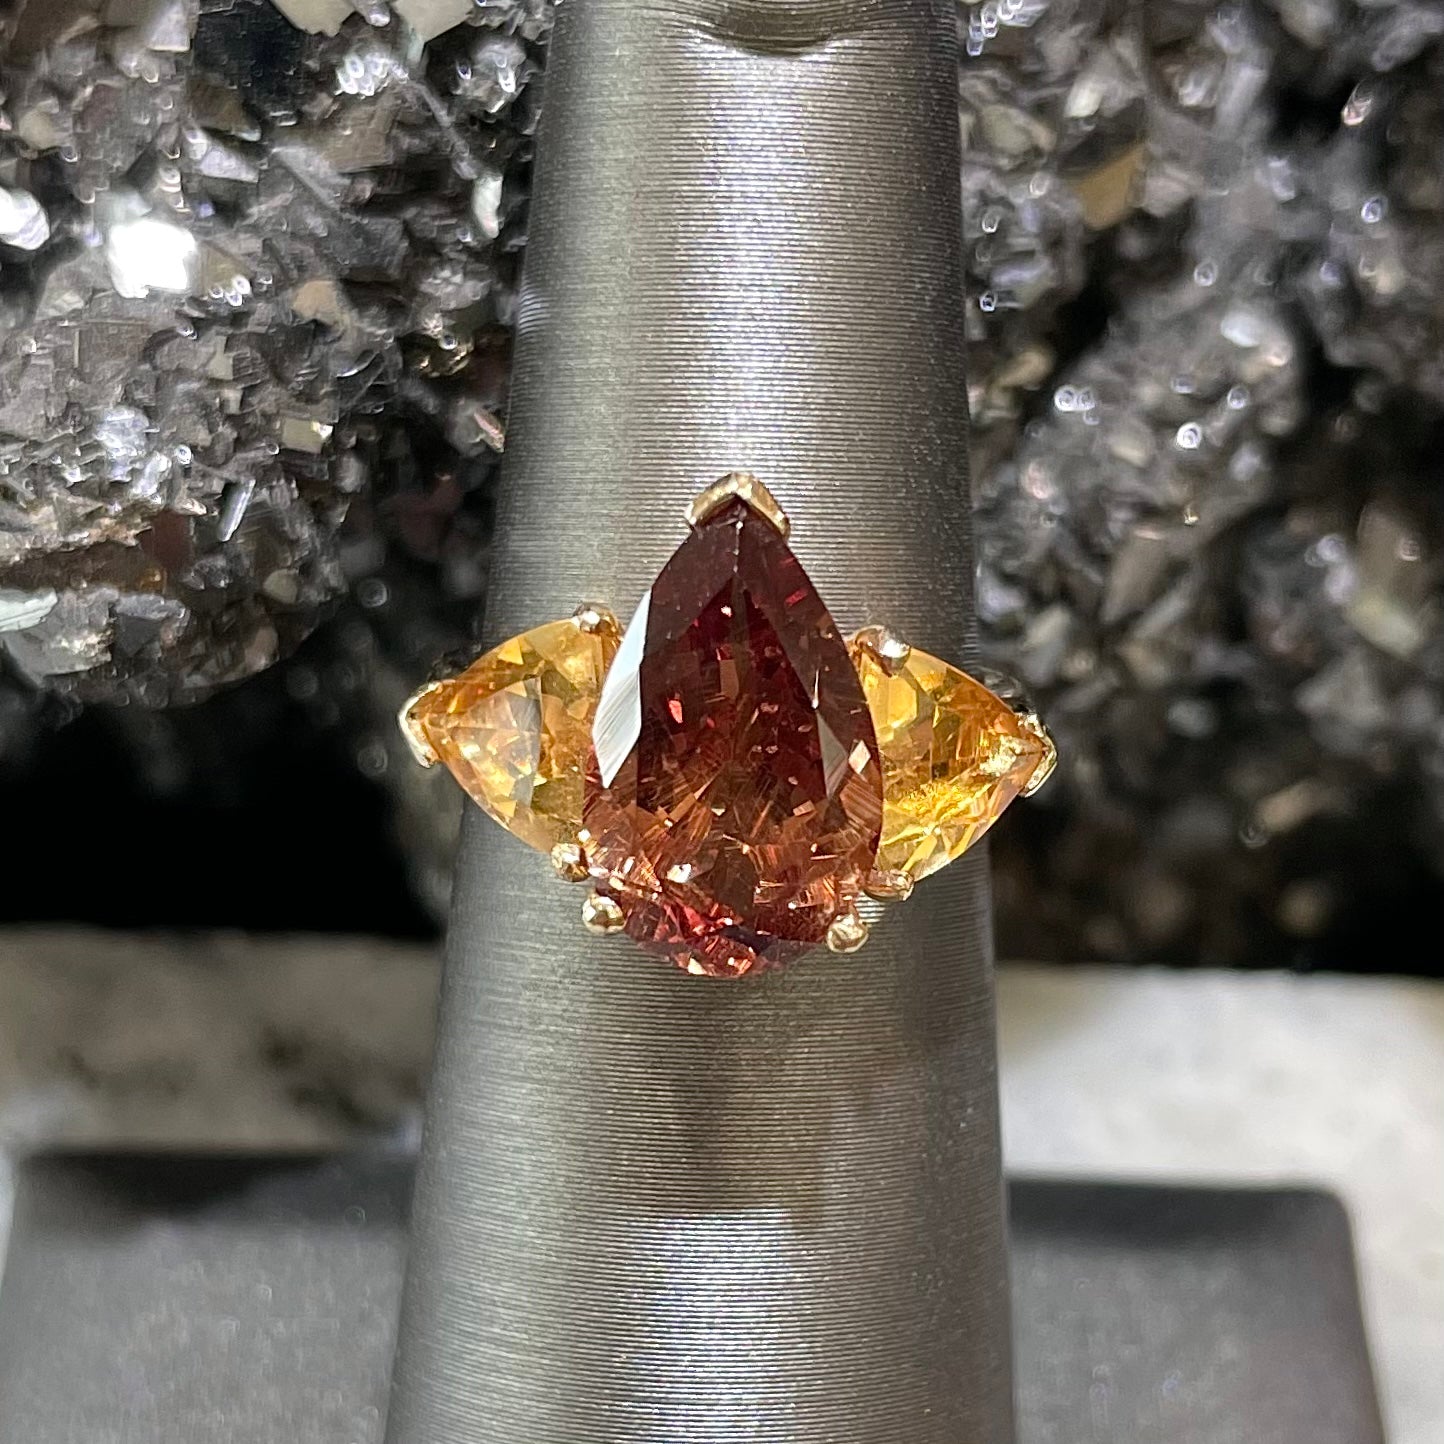 A gold ring set with a pear shape color change garnet between two trillion cut citrine accent stones.